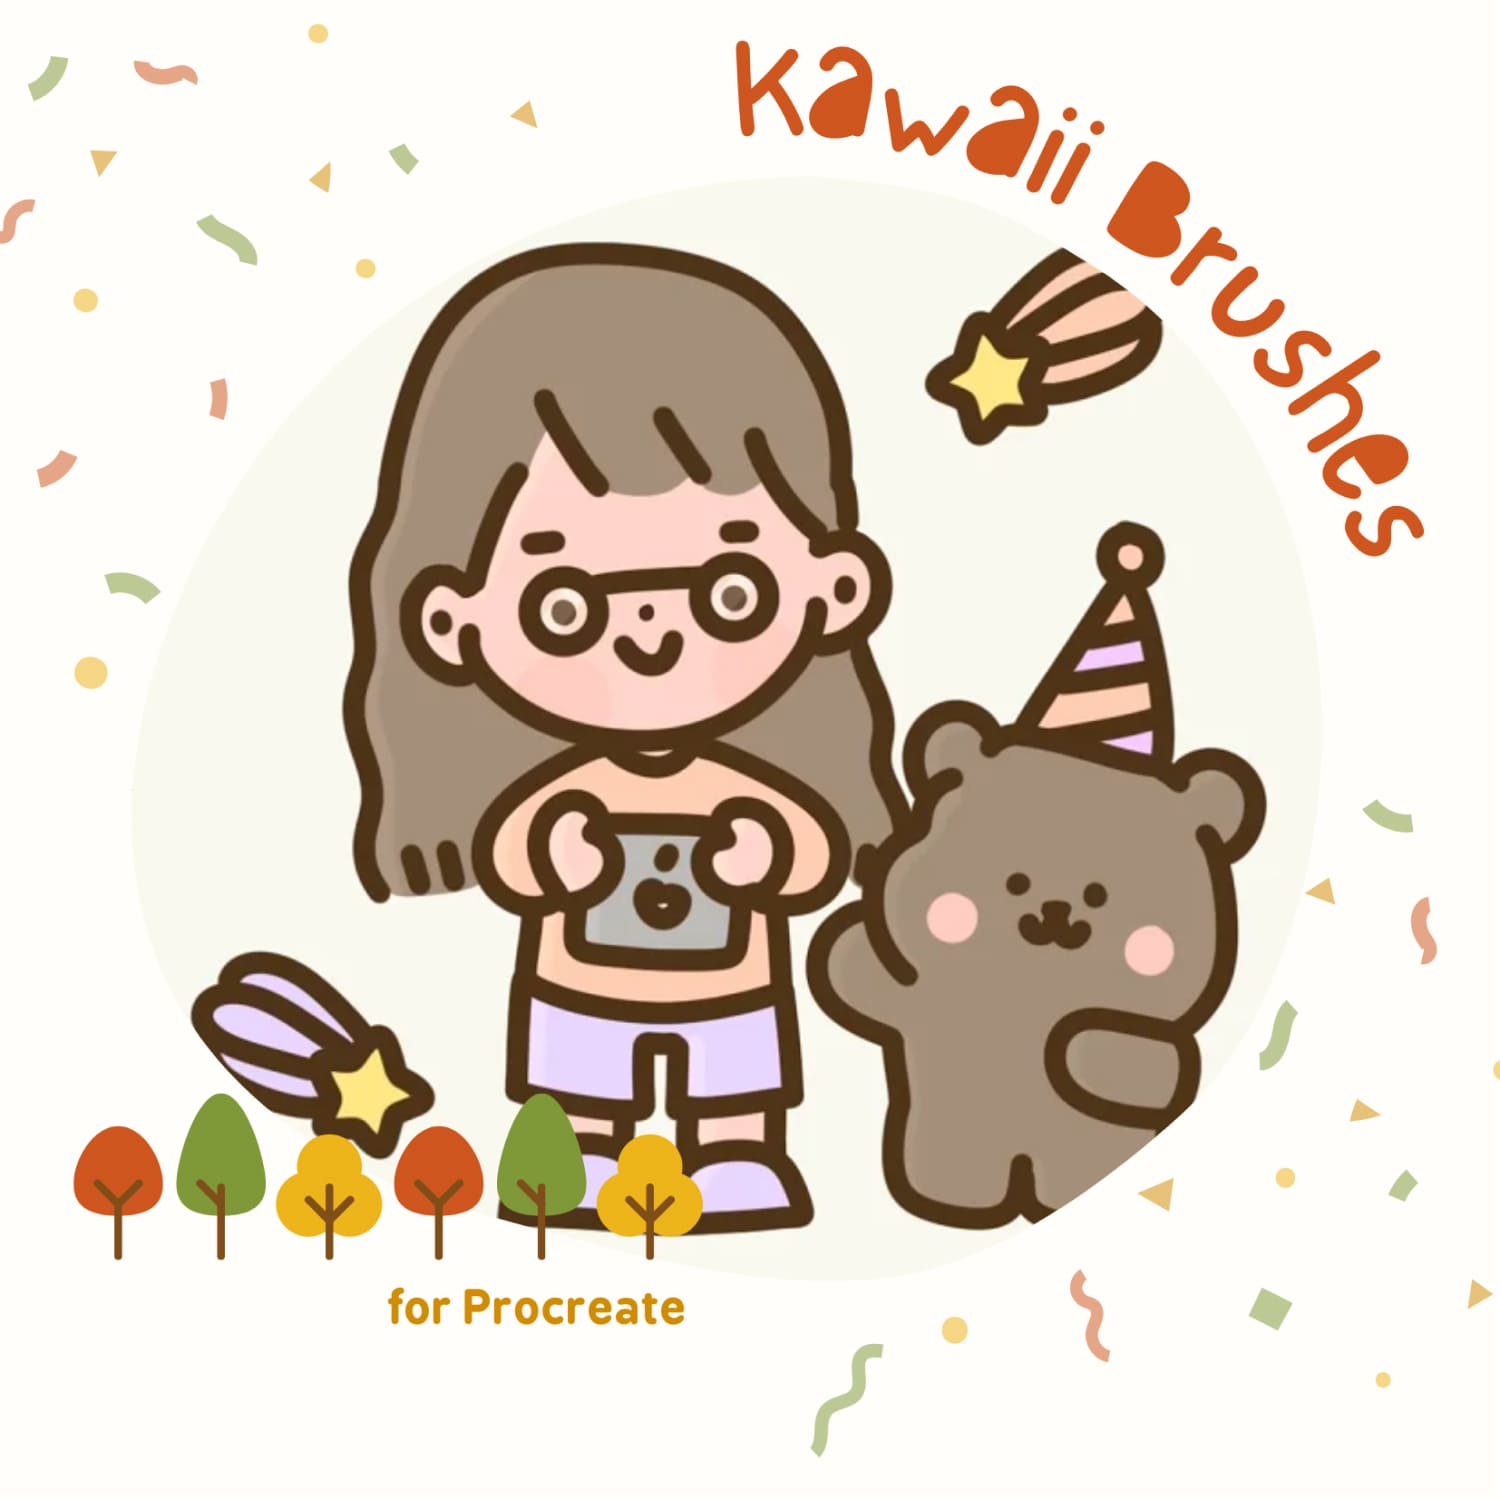 Kawaii brushes for procreate, main picture 1500x1500.